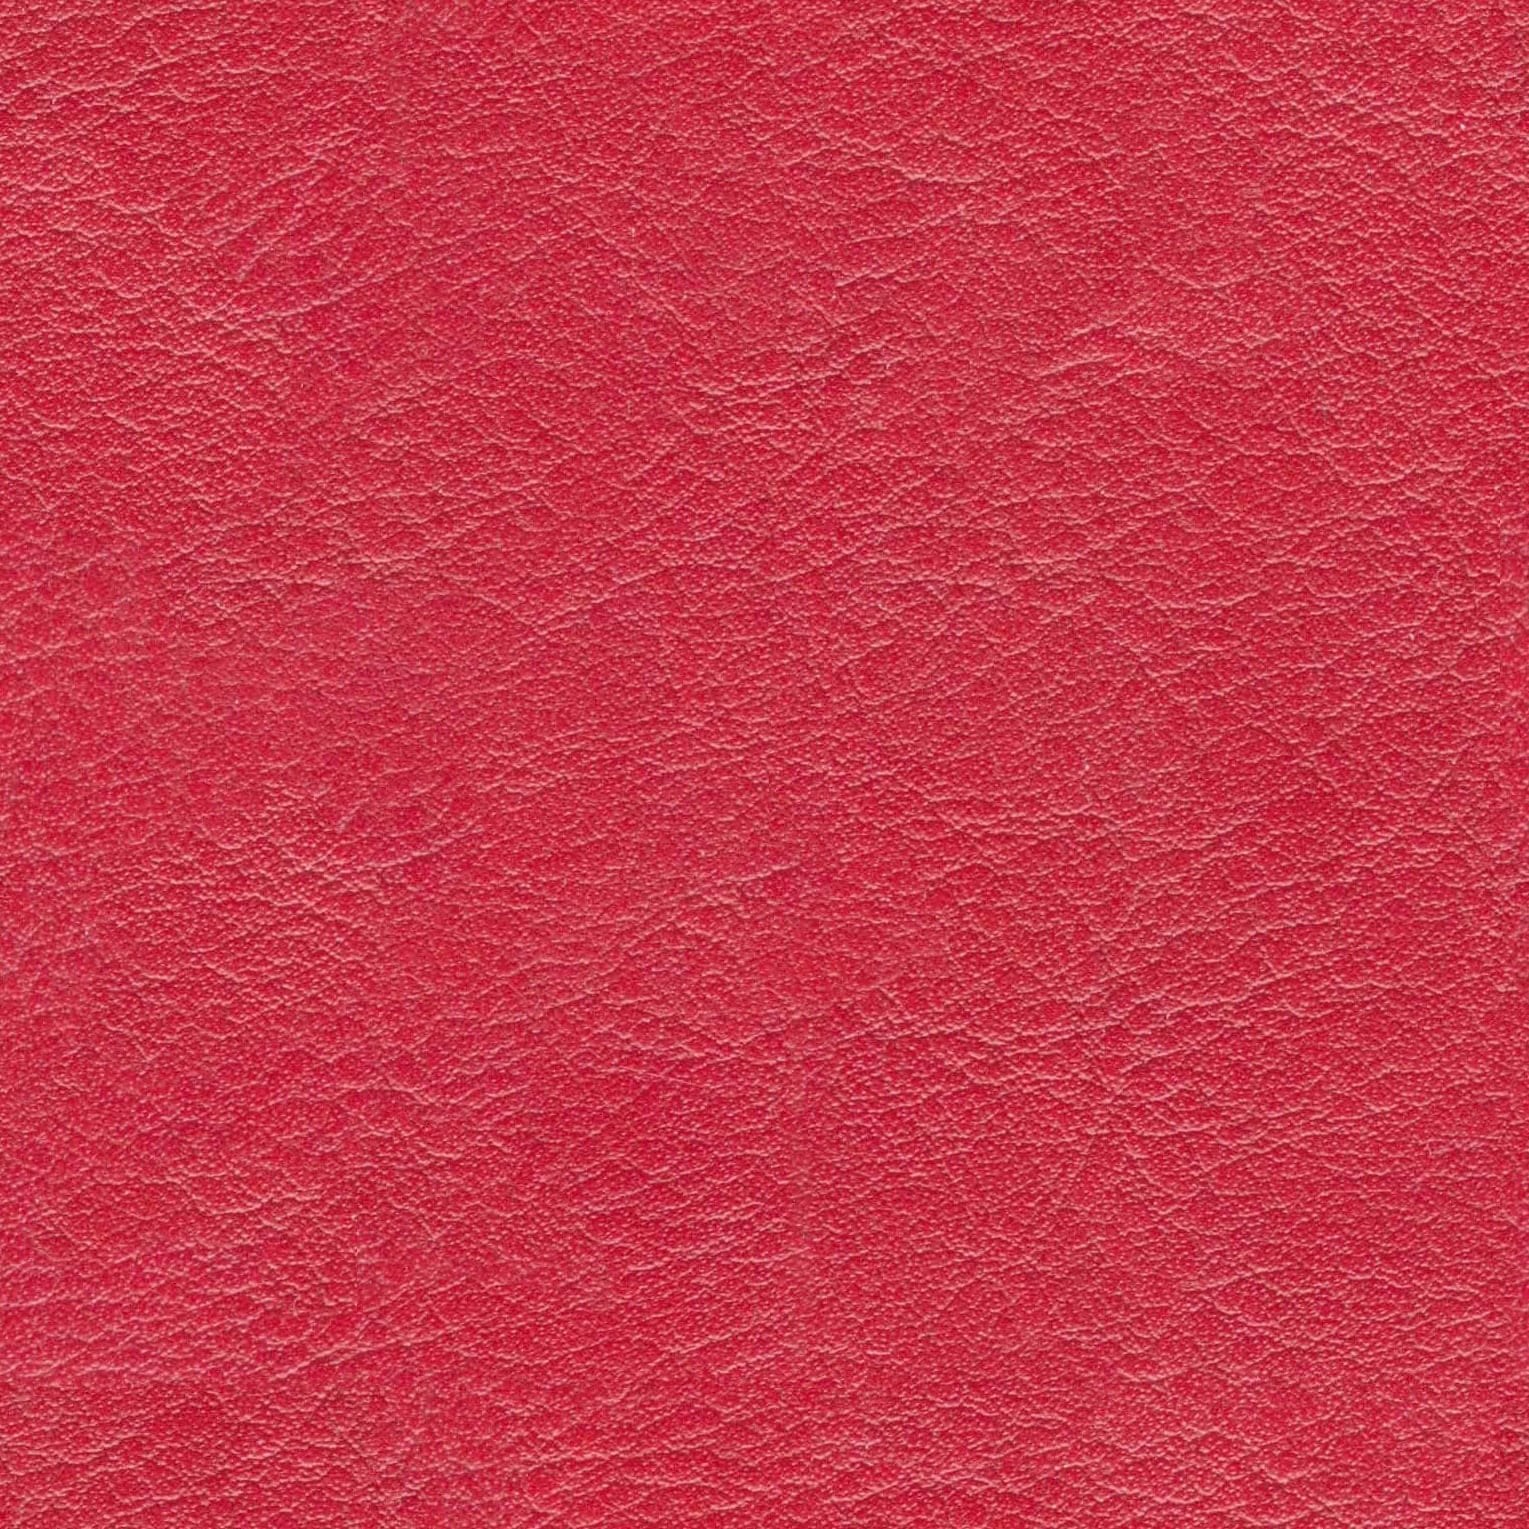 Red art leather – Free Seamless Textures - All rights reseved